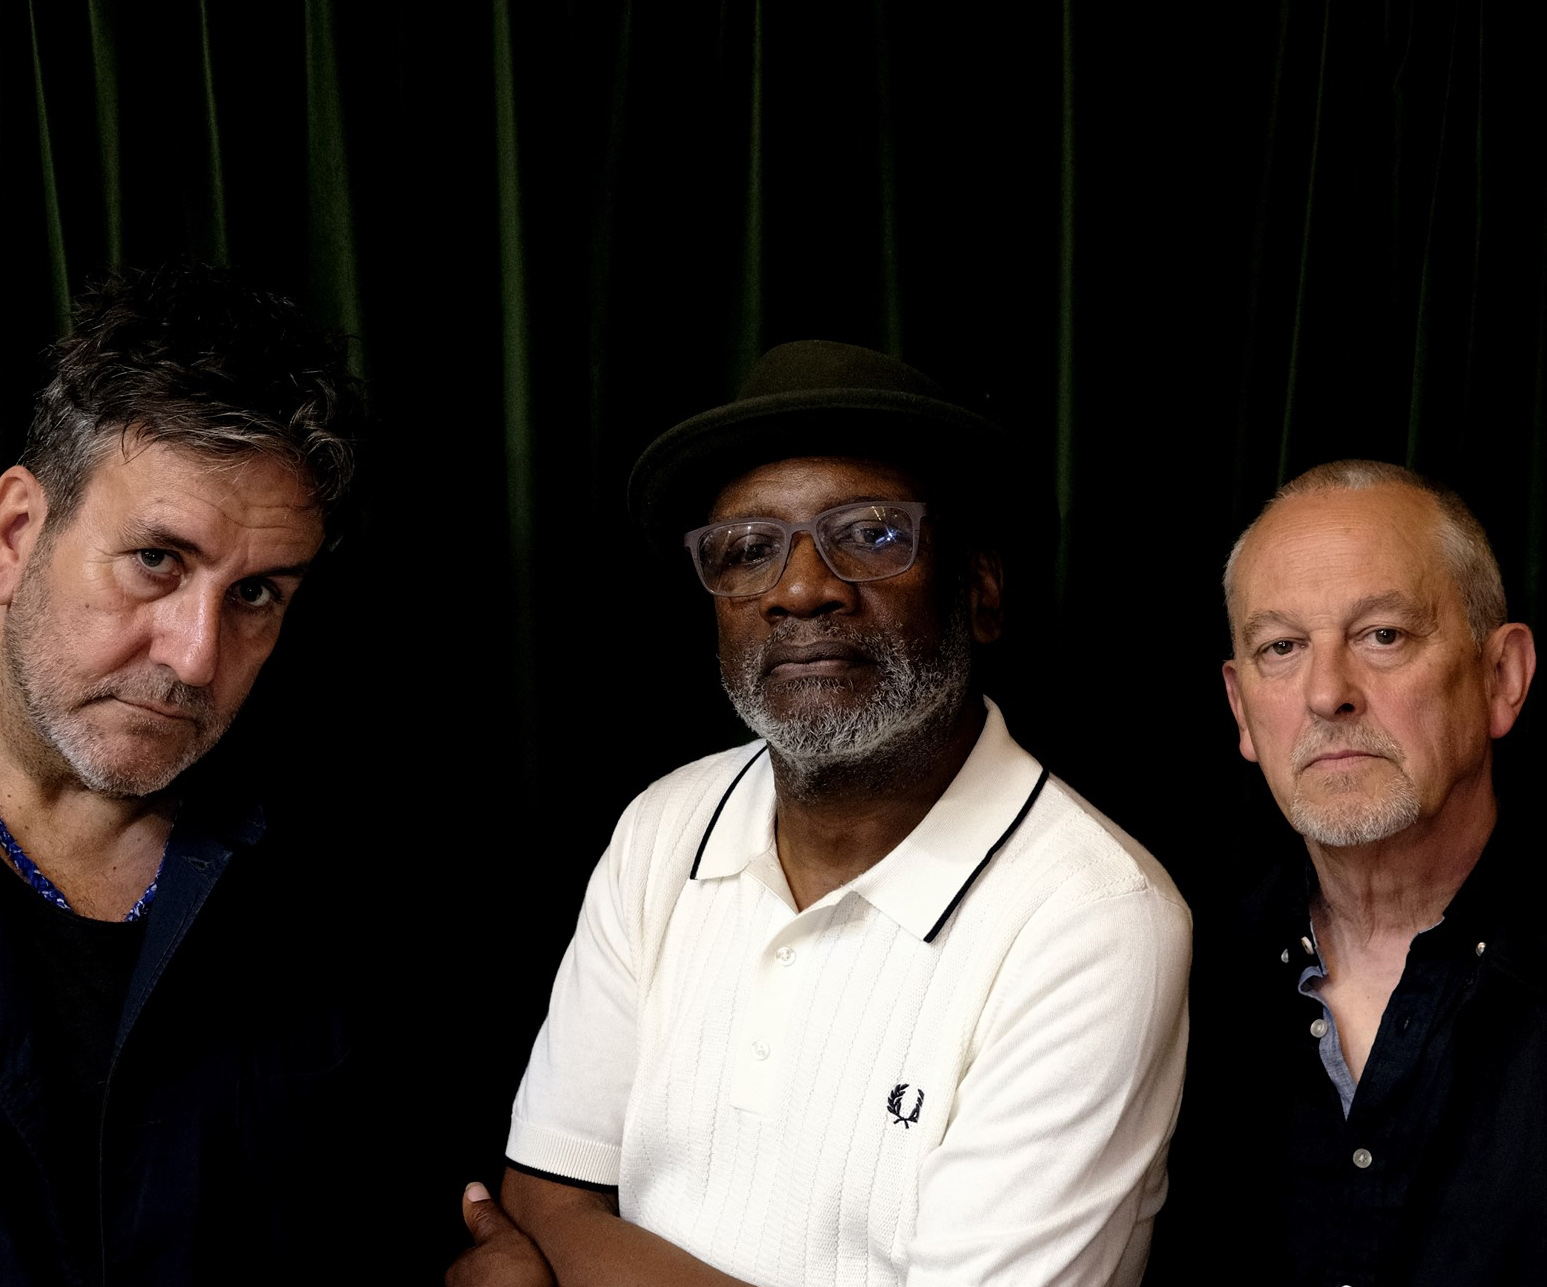 THE SPECIALS return with the release of their brand new album 'Protest Songs – 1924 -2012' 